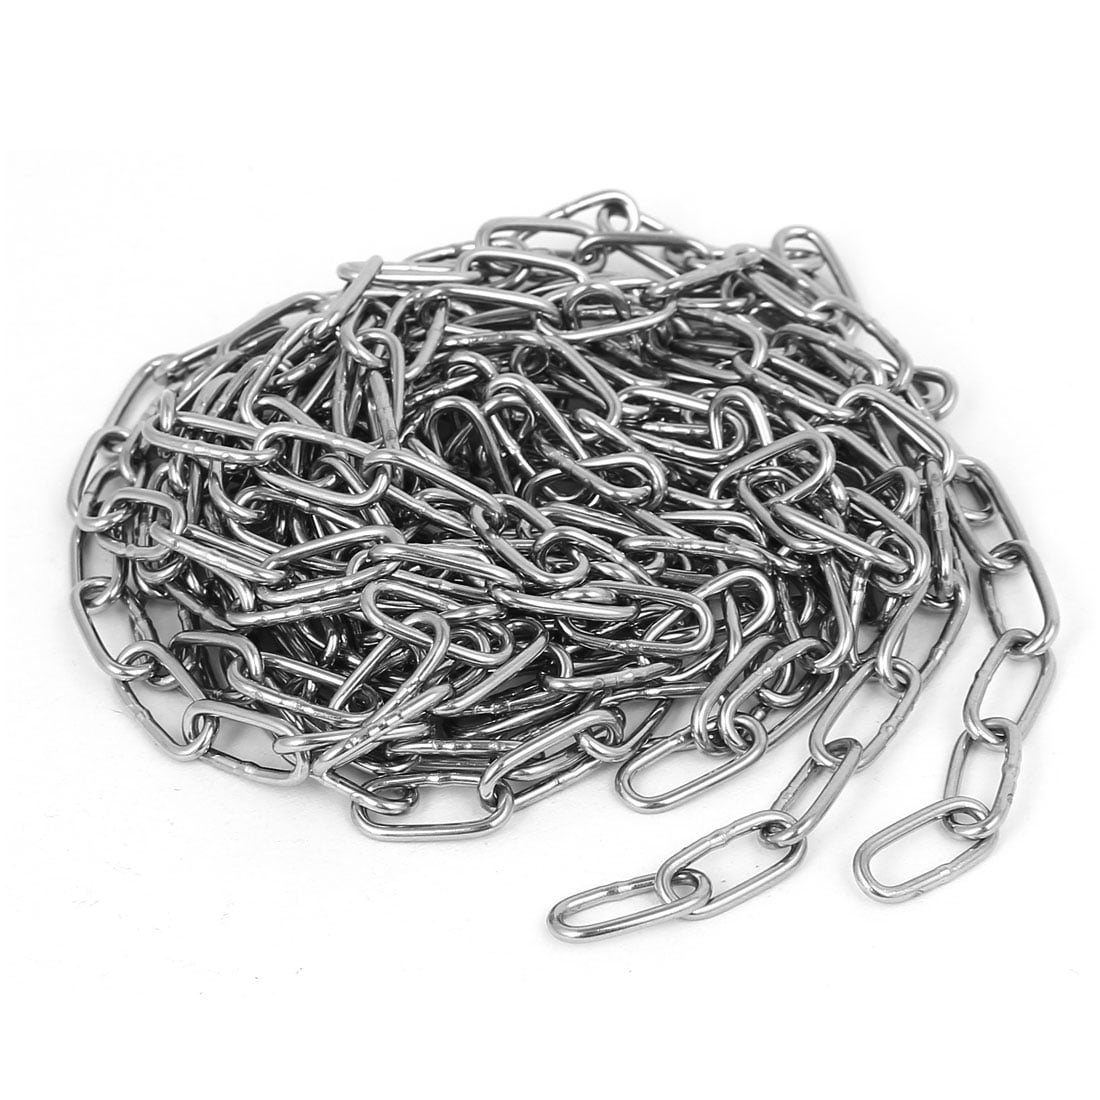 Zinc Plated 304 Stainless Steel Proof Coil Chain 5 Meter 2.5mm Thick 